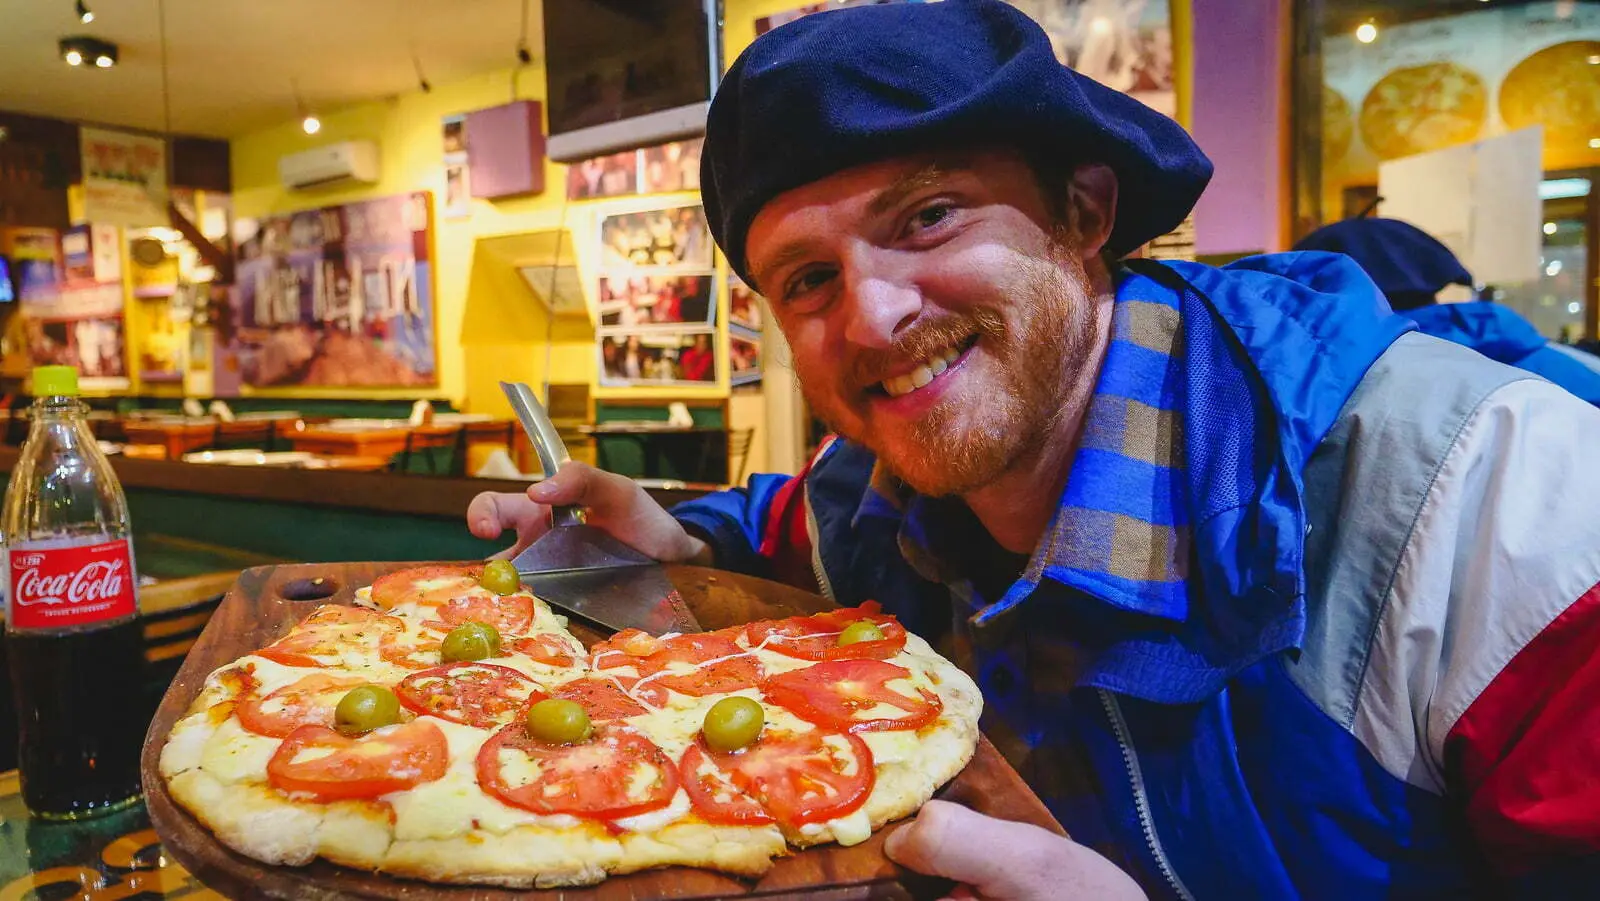 Nomadic Samuel eating a pizza in Argentina. Hey, doesn't that kind of look a bit like a portfolio? A bit more delicious foro sure ;)